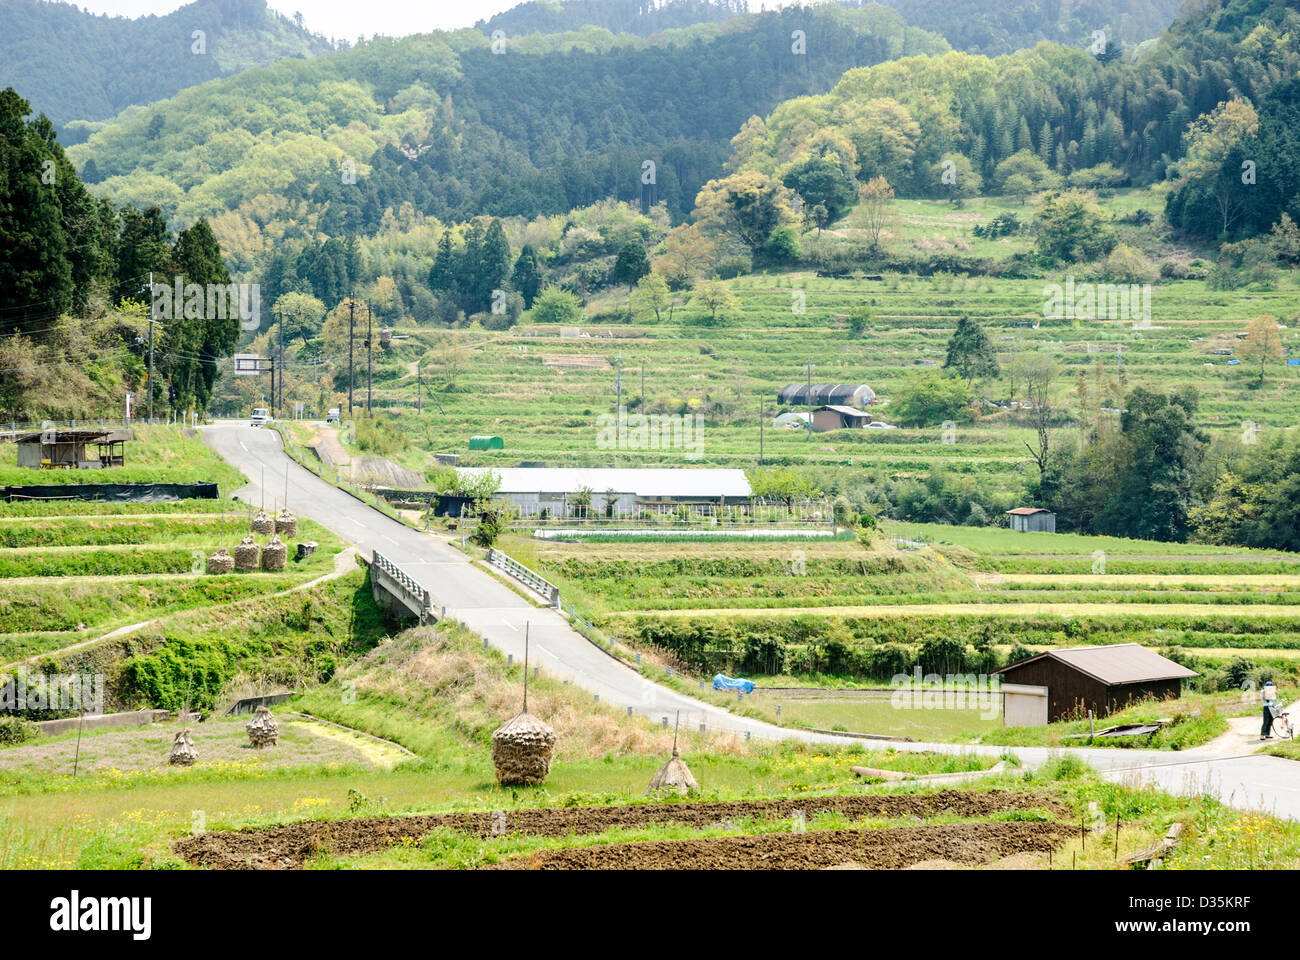 Green rice fields and hills in rural Japan Stock Photo